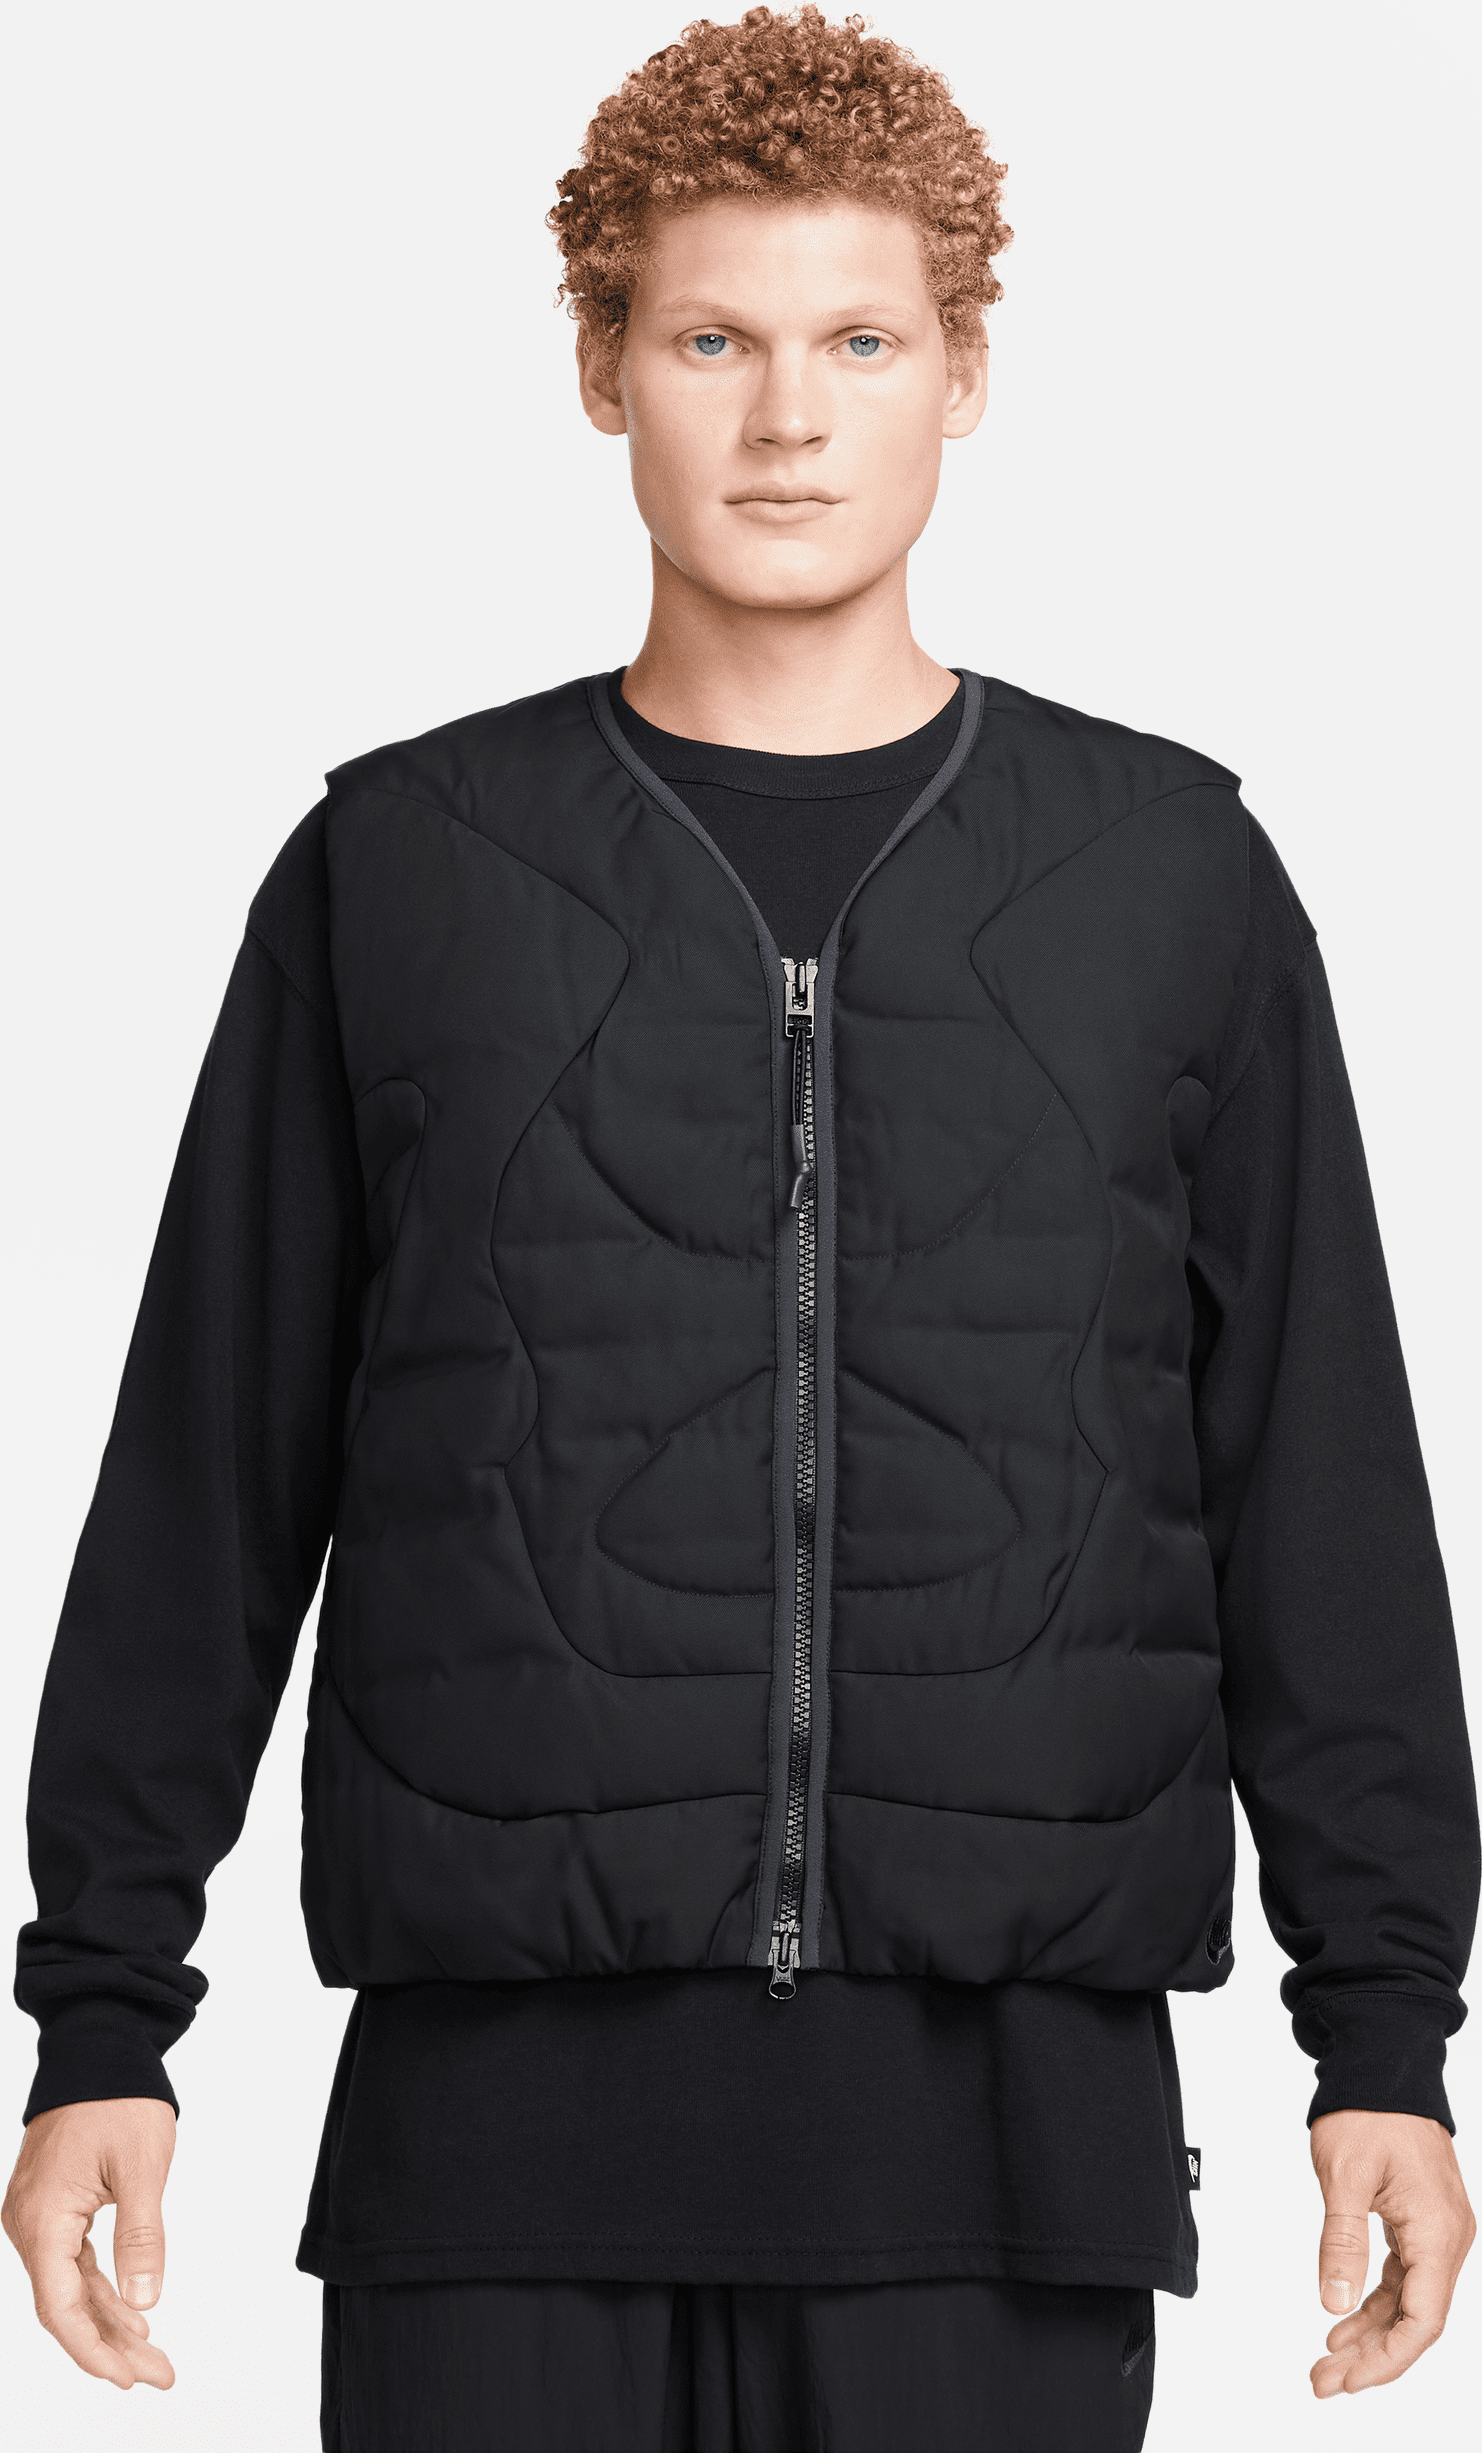 Nike Sportswear Tech Pack Therma-FIT ADV Men's Insulated Gilet Black